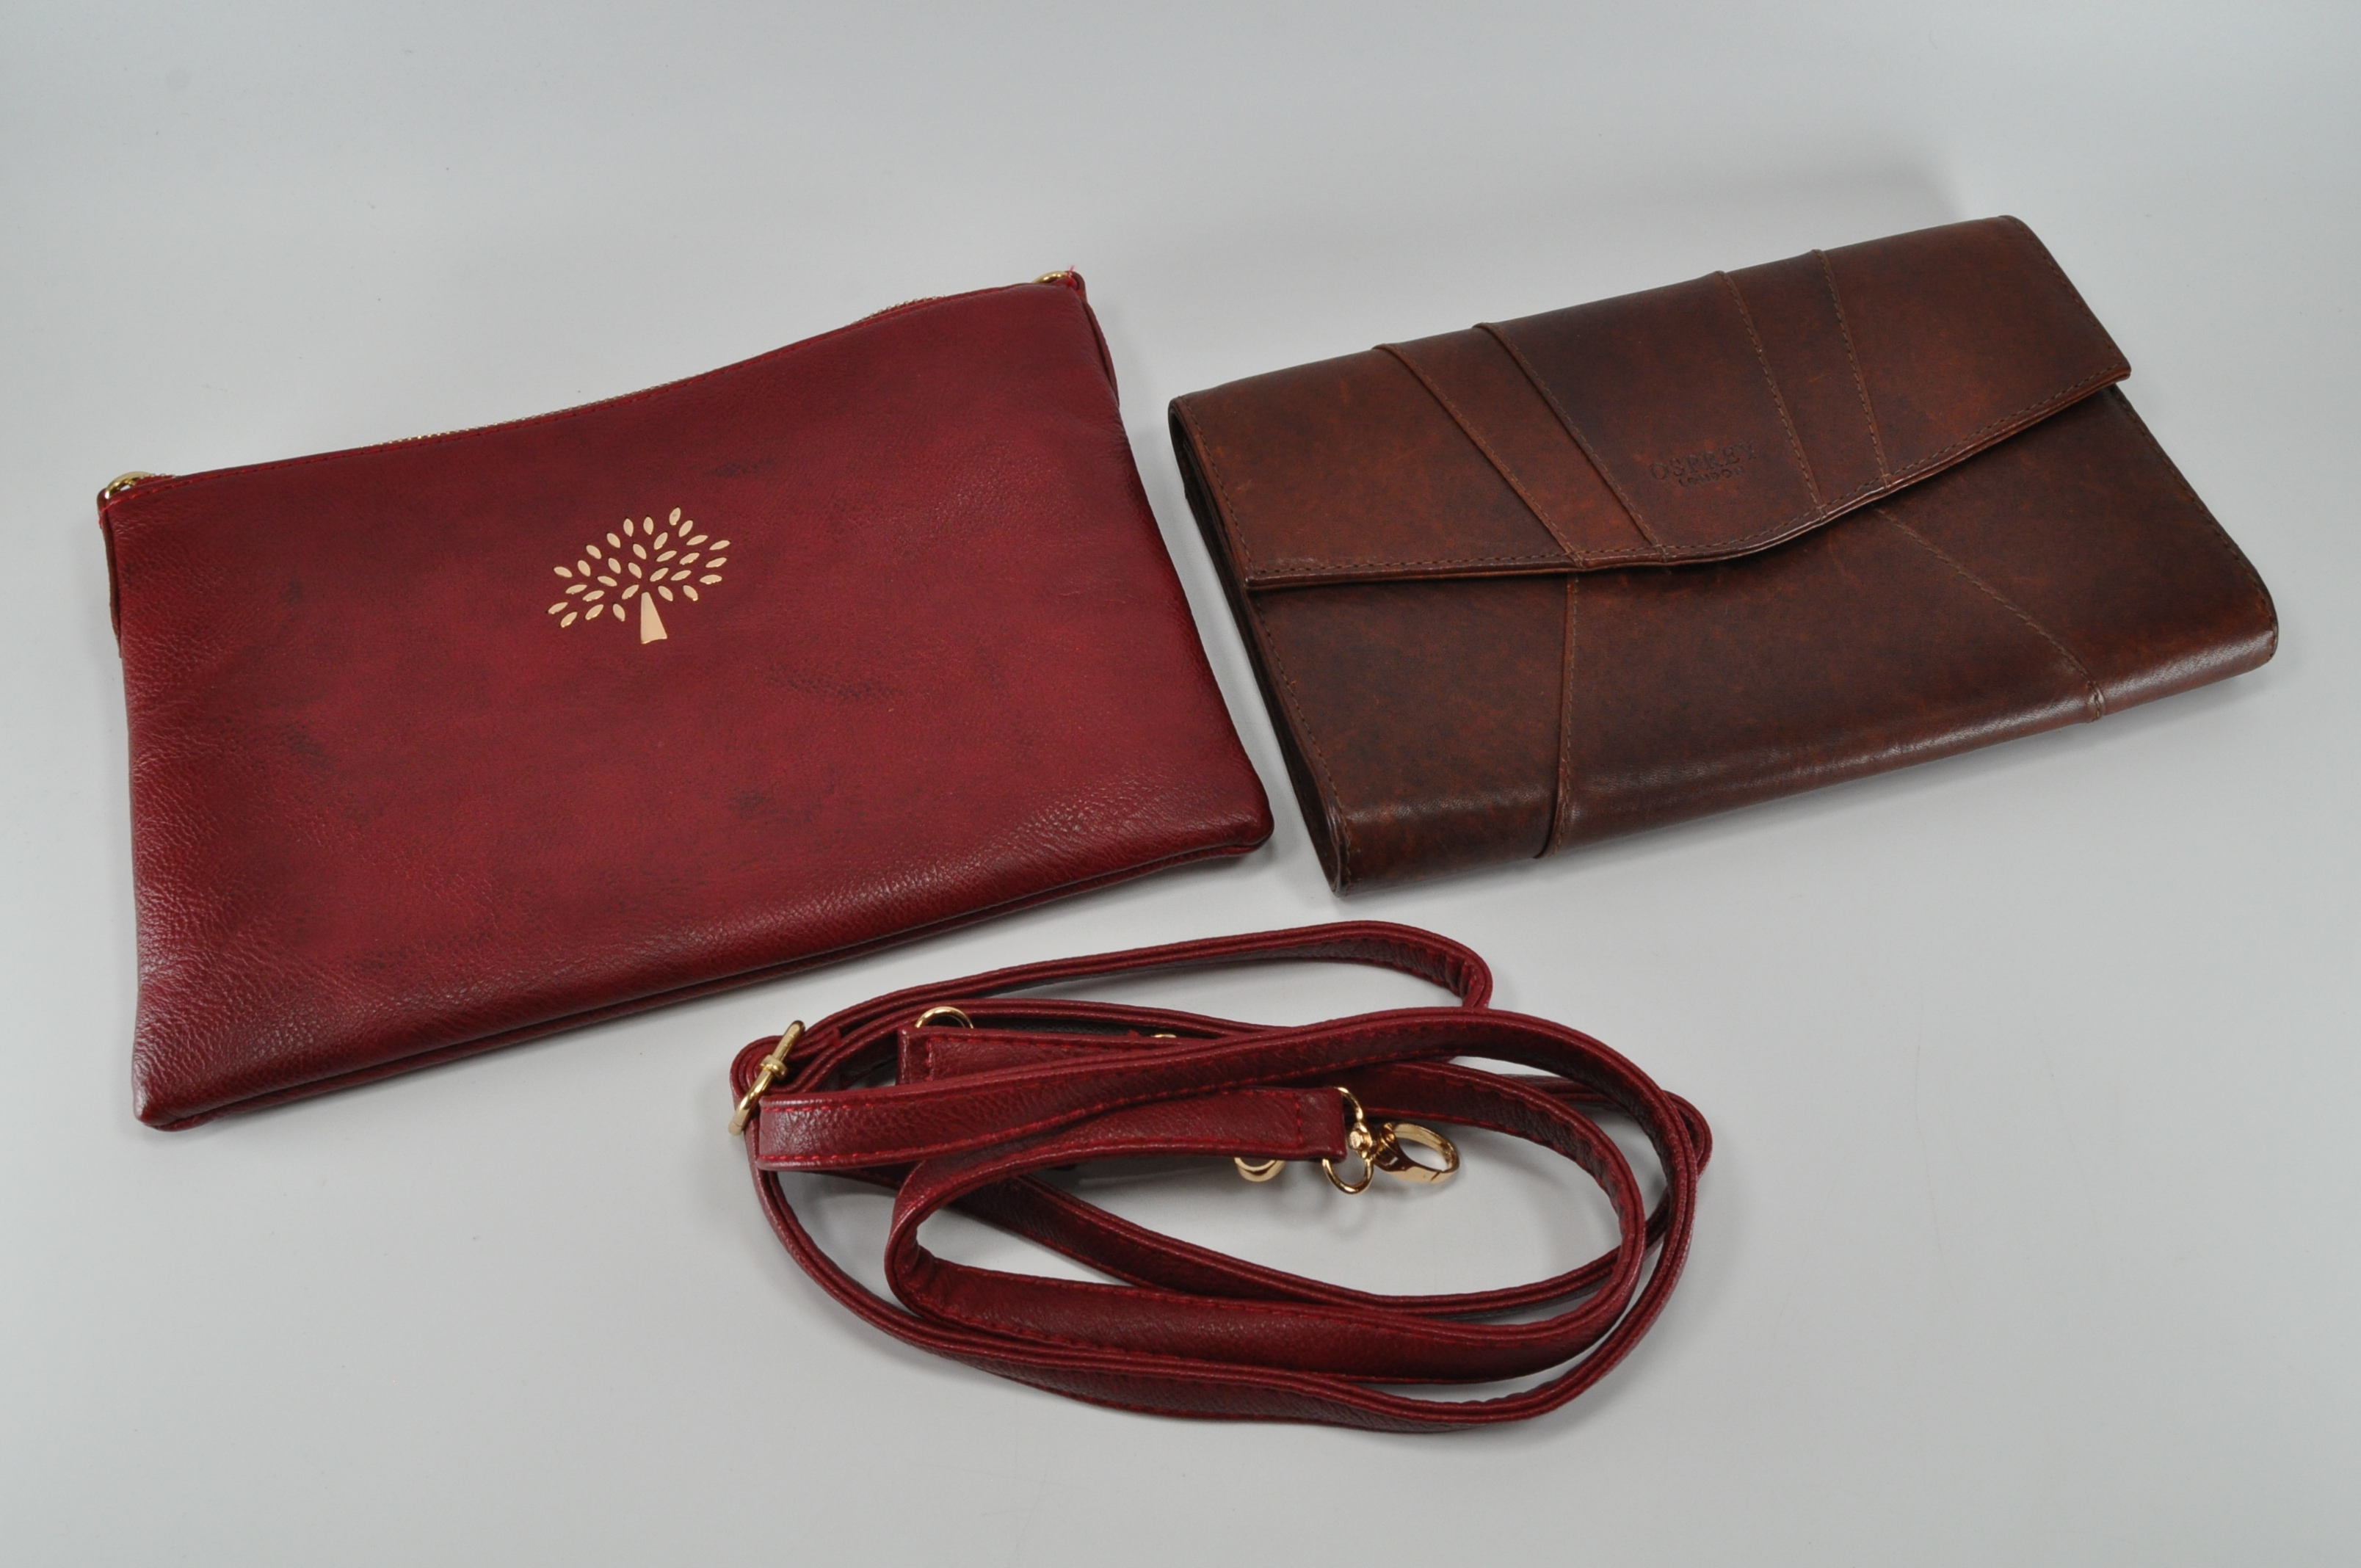 MULBERRY & OSPREY DESIGNER LEATHER HAND BAGS